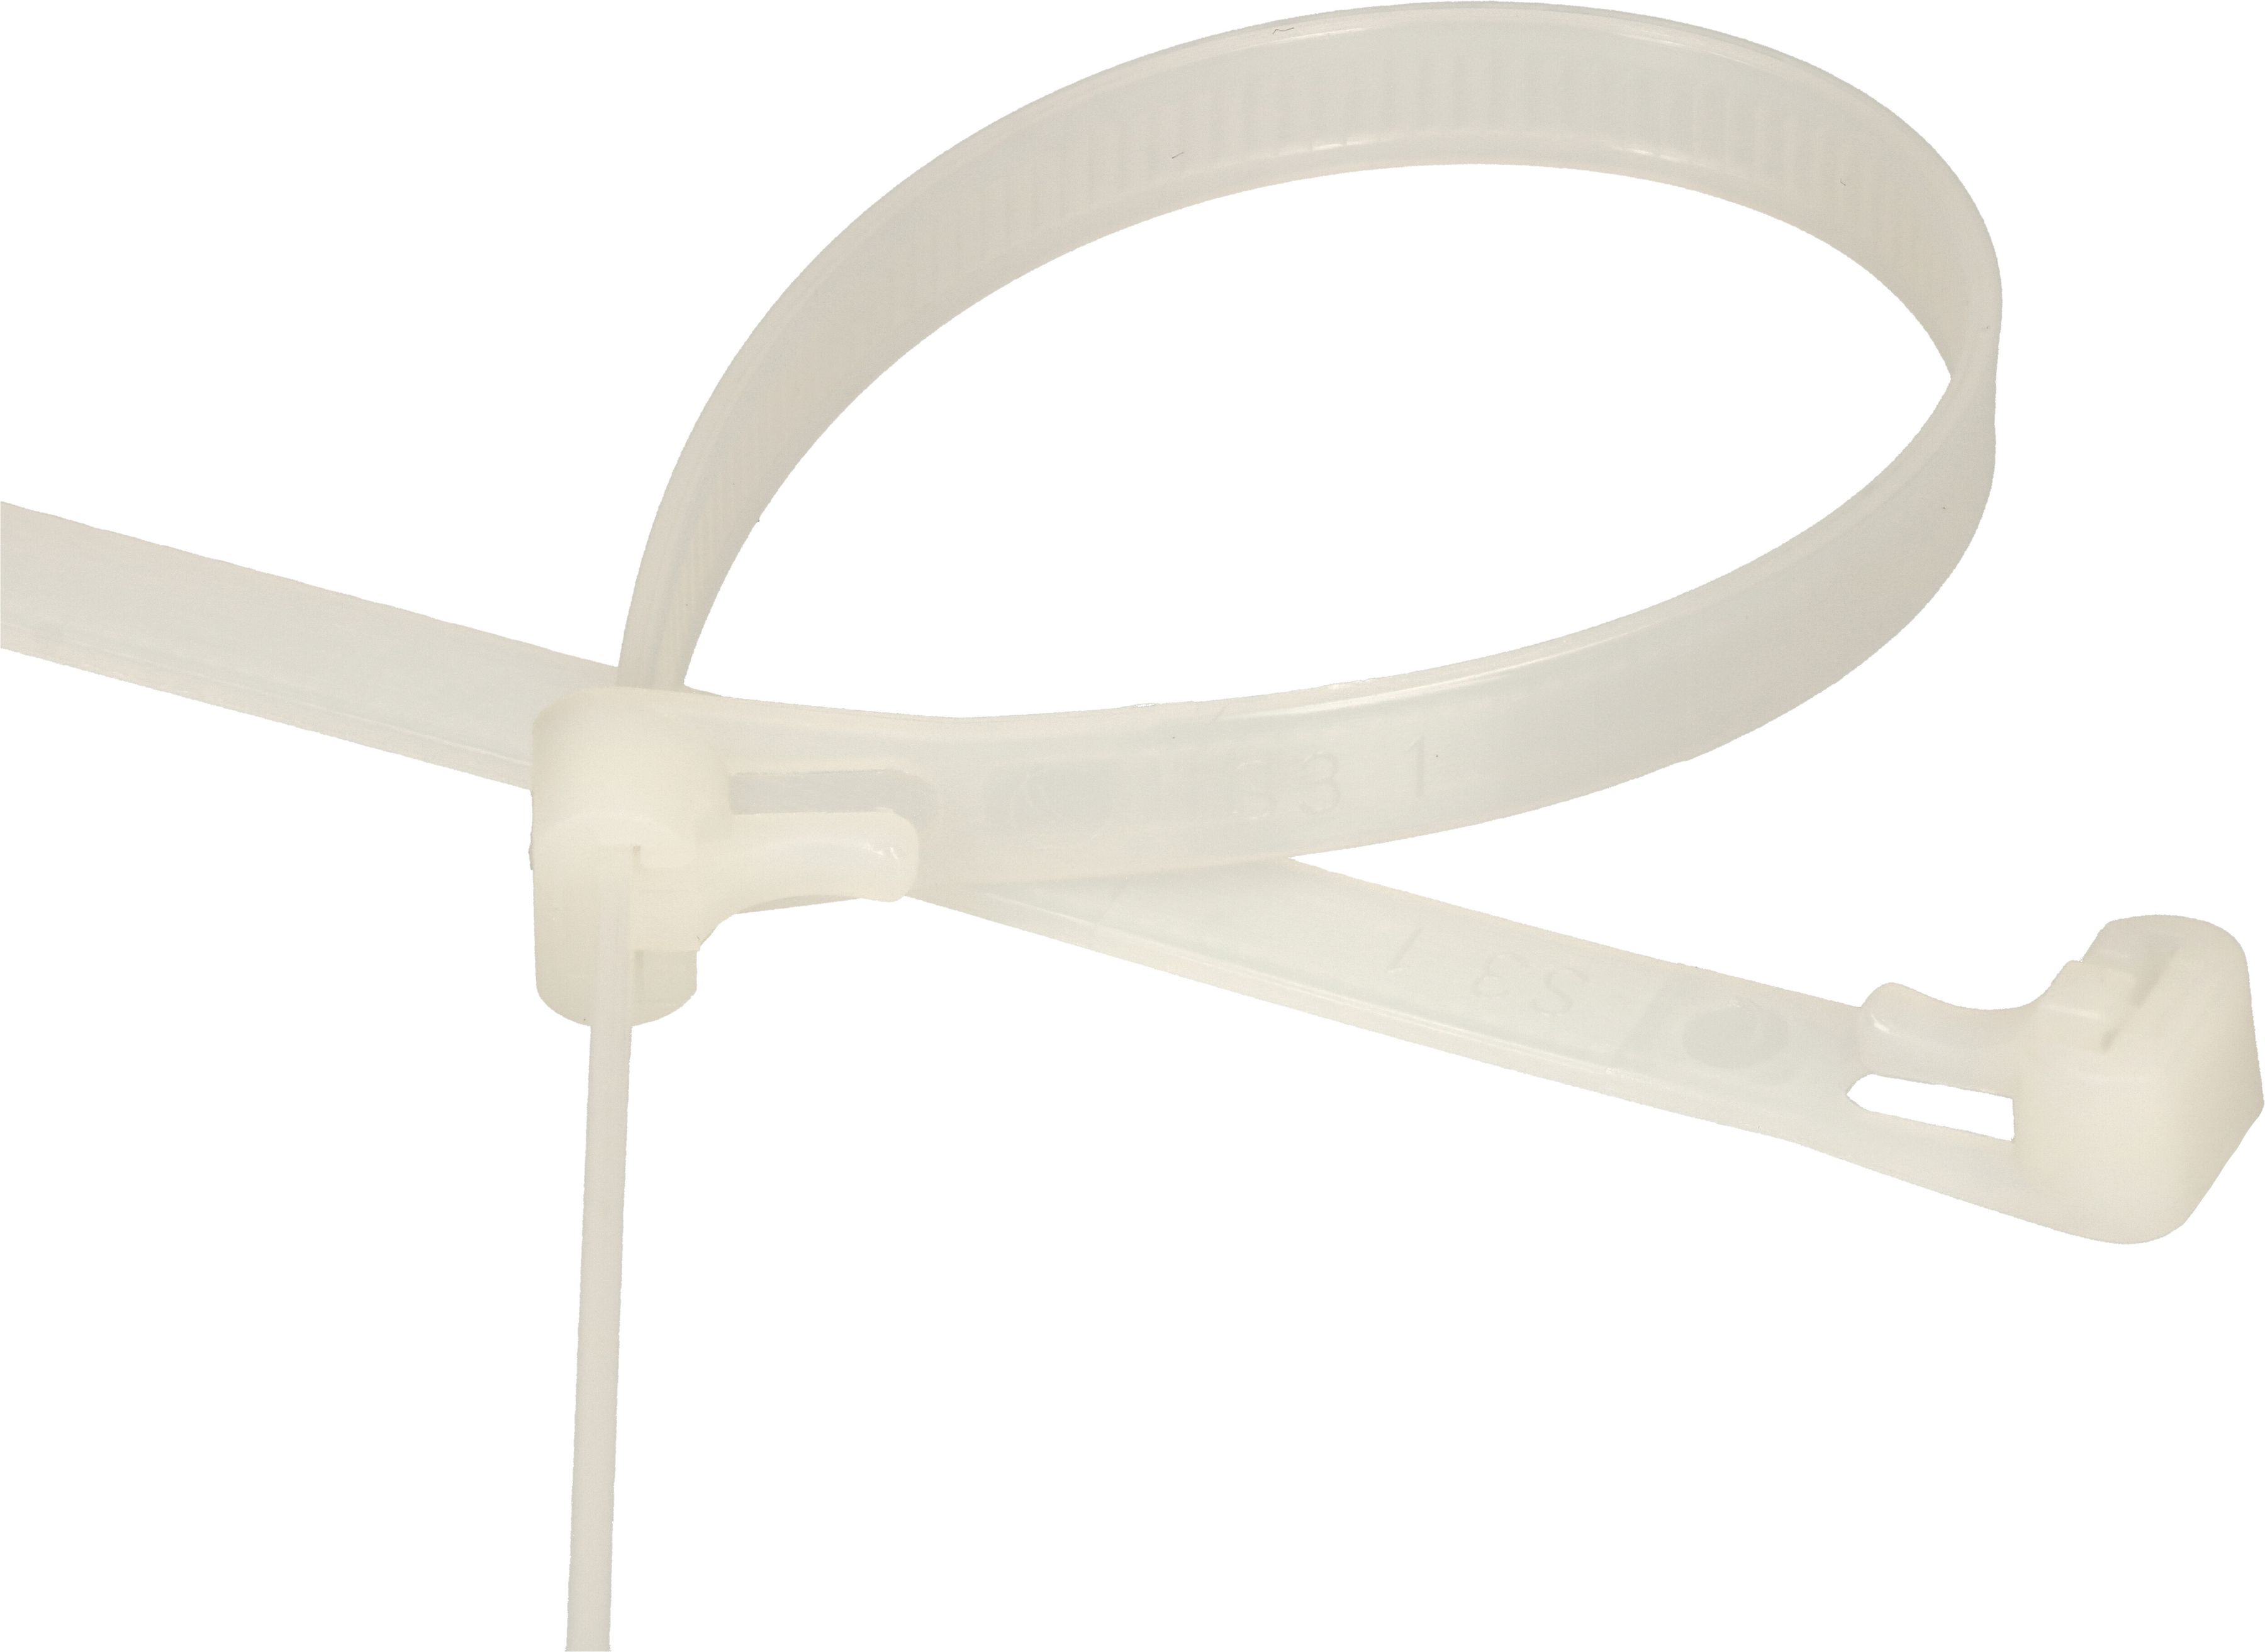 Cable ties reopenable 7.5x300mm white